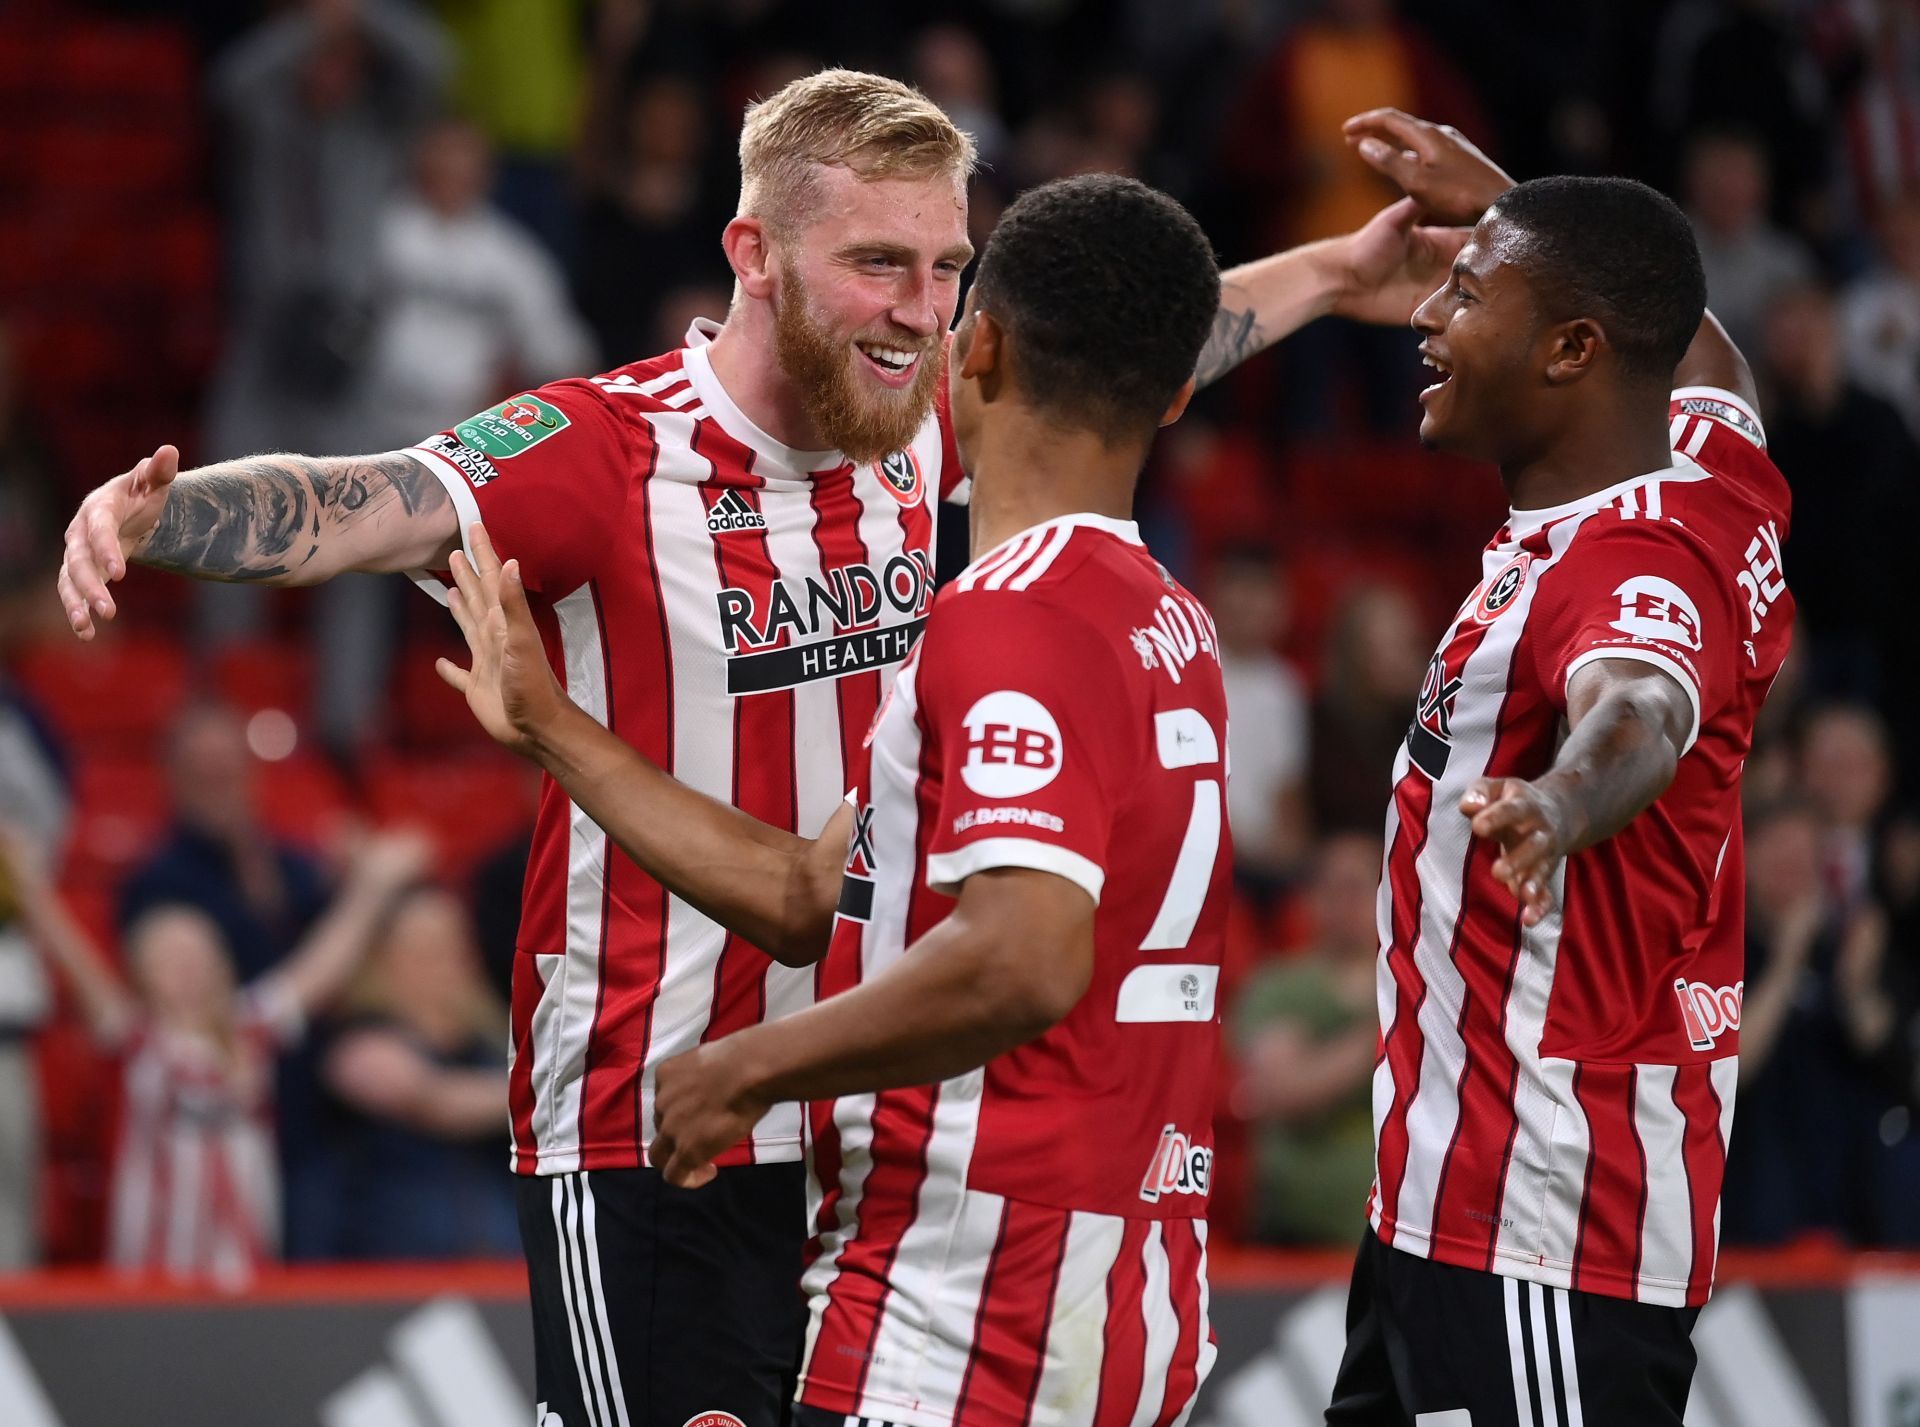 Sheffield United will be looking to bounce back on Saturday